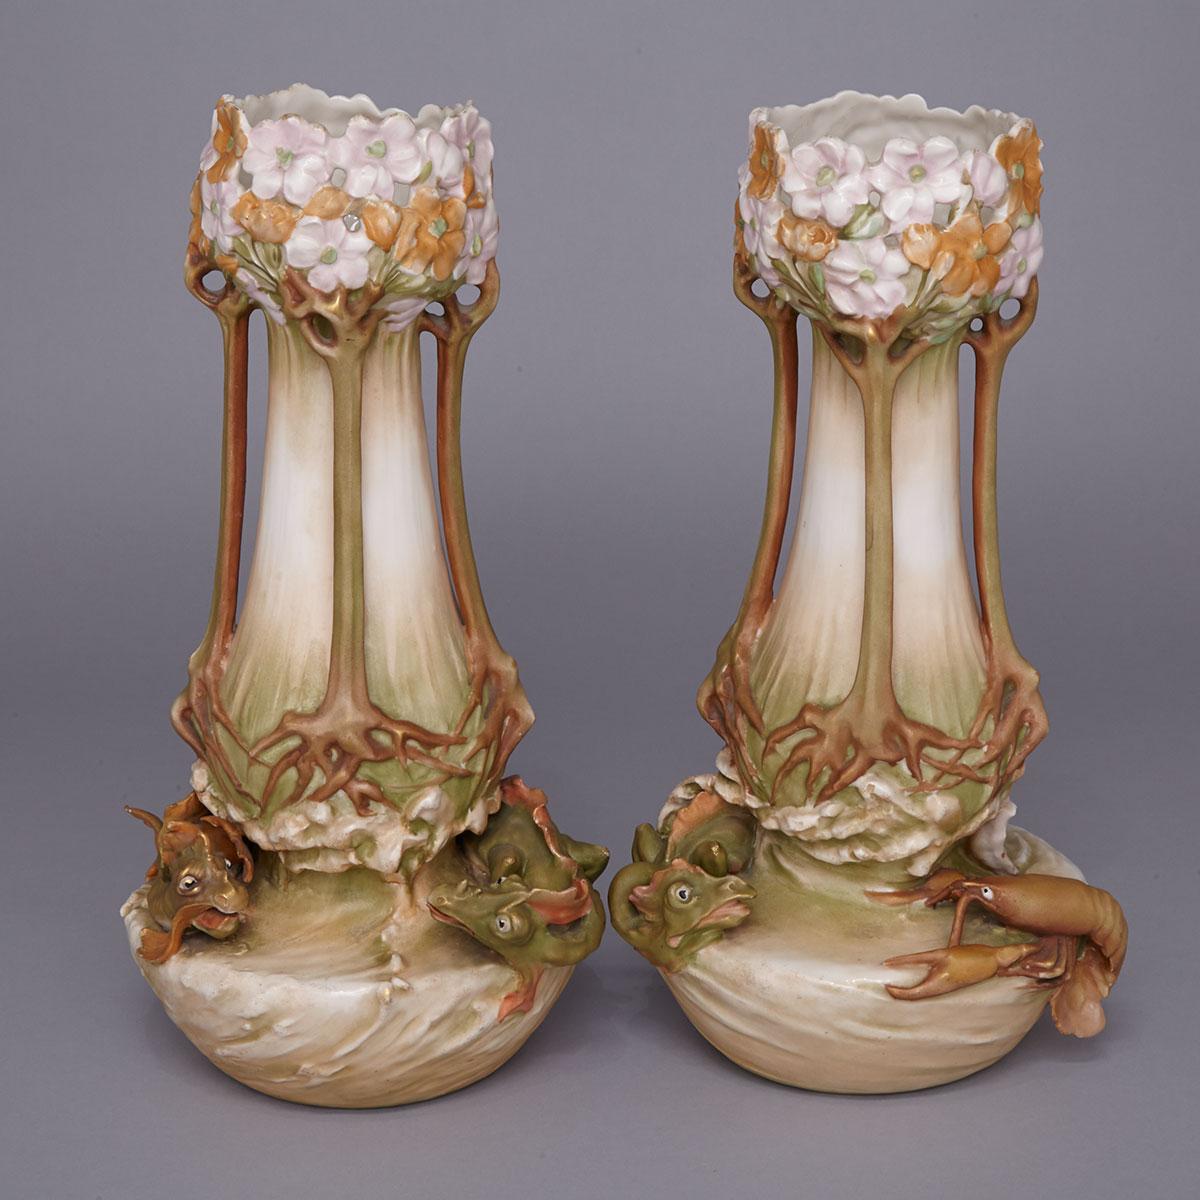 Pair of Royal Dux Vases, early 20th century